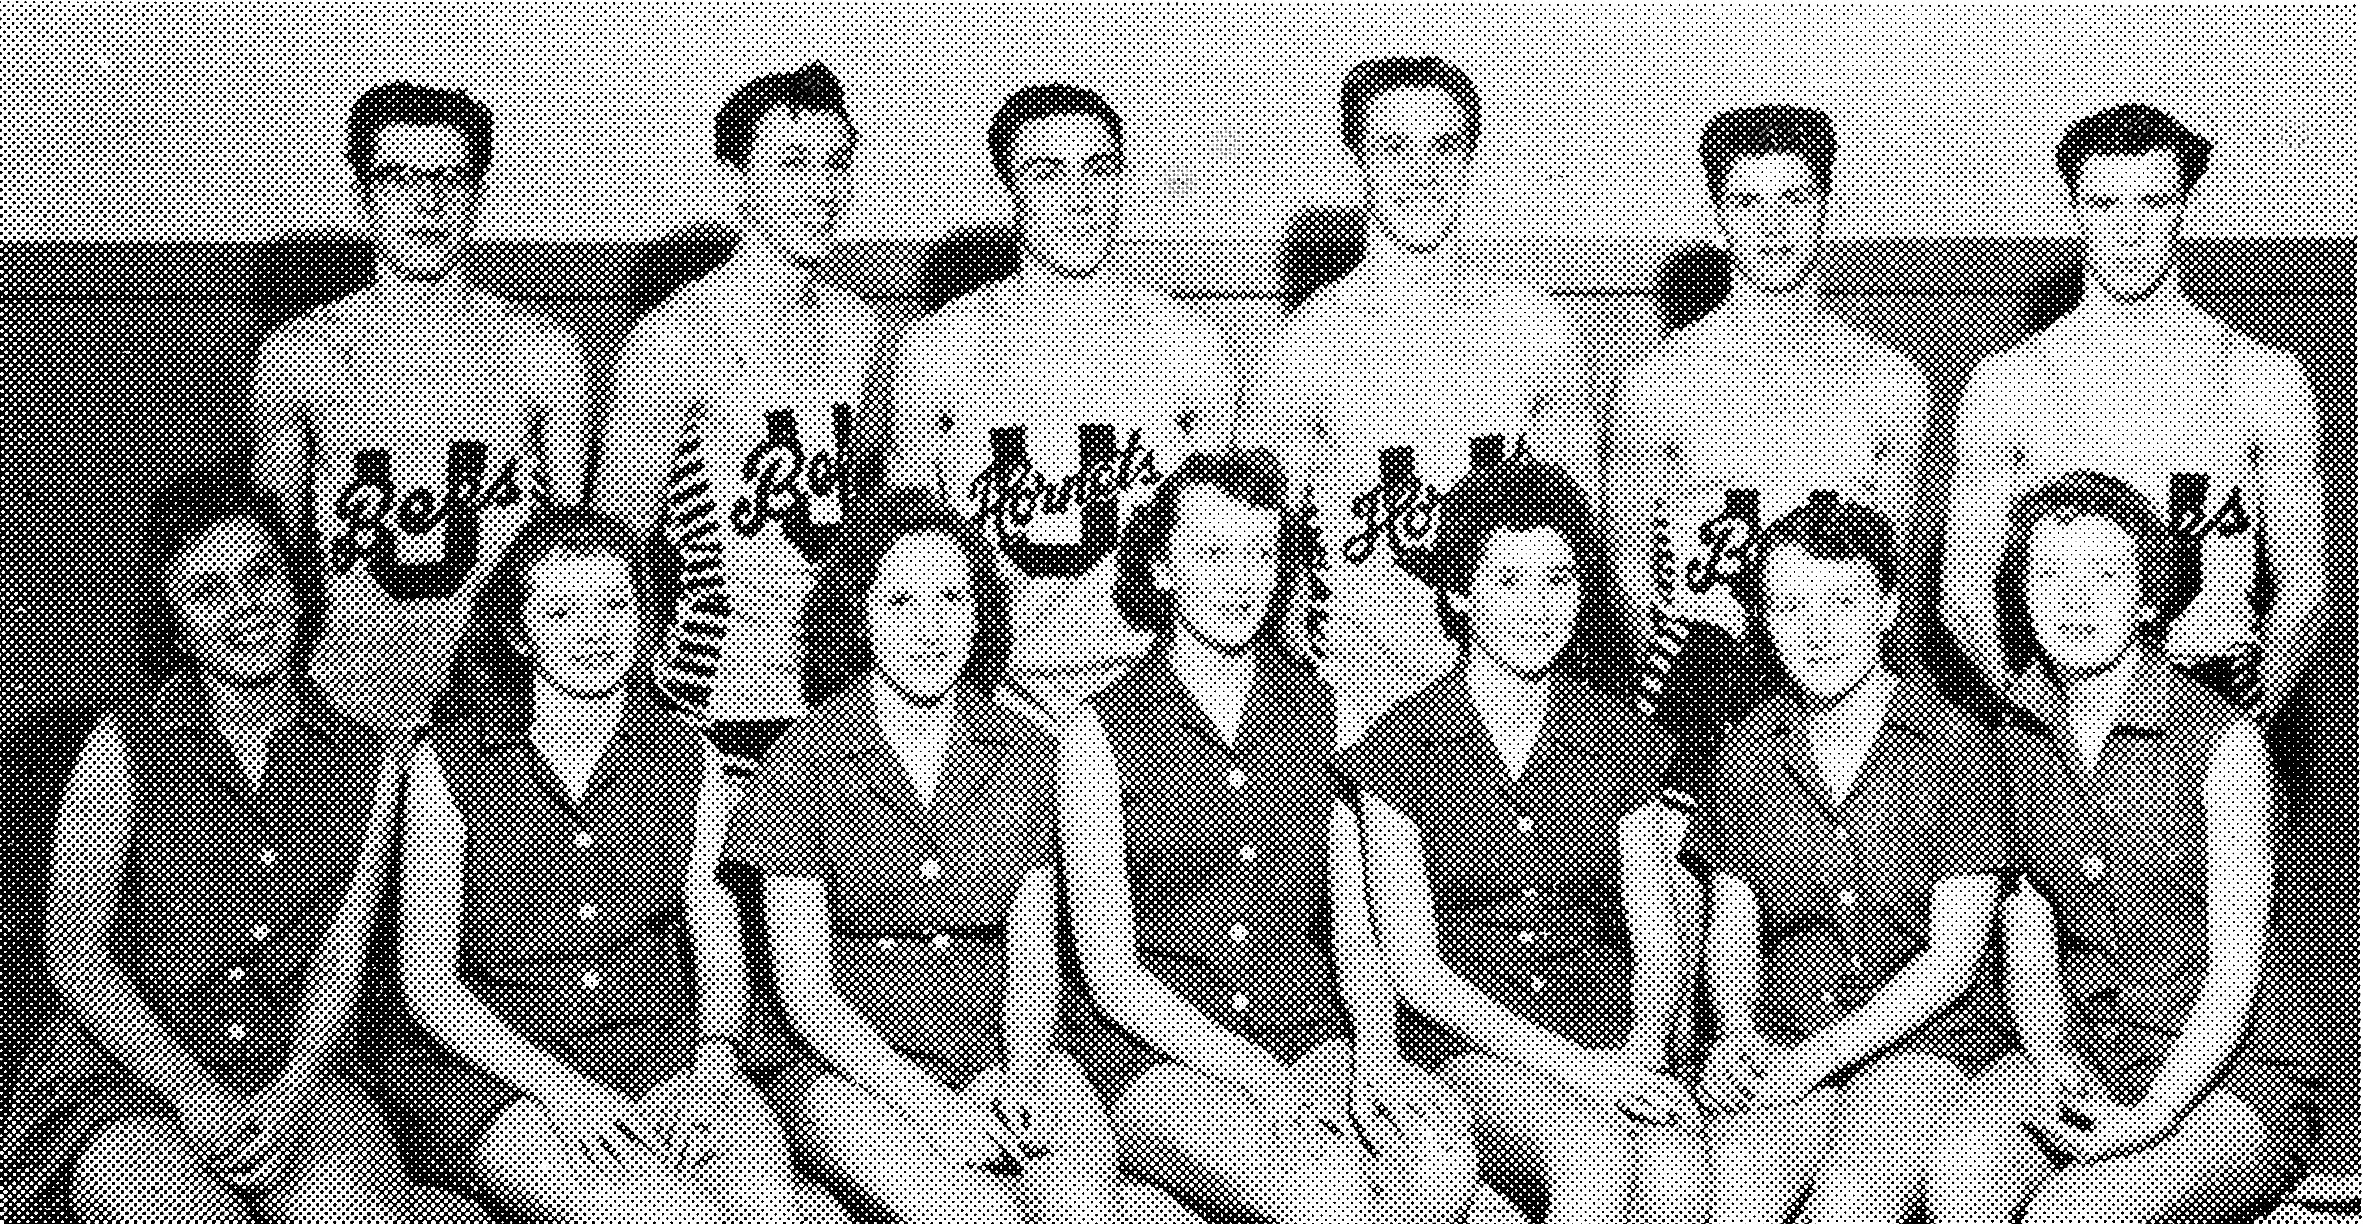 (Click to magnify) FRONT ROW: C. Barton, D. Taylor, G. Wagg, D. Whitney, L. Prentice, E. Kester, M. Lickiss; BACK ROW: D. Arbuckle, G. McNelly, V. Ferguson, G. Barton, K. Cornell, C. Todd.